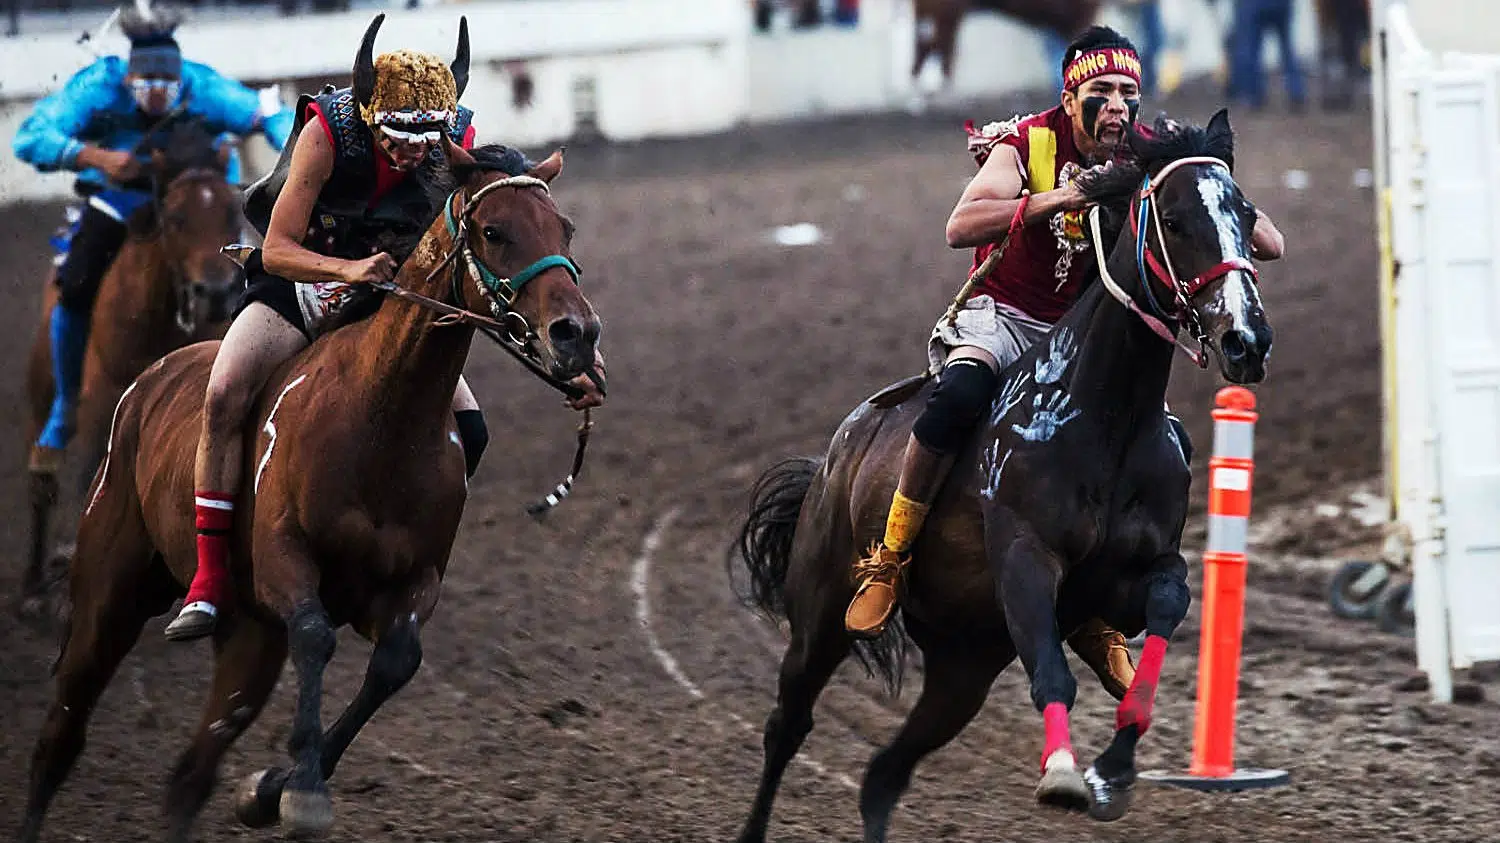 Following a successful first event, Indian Relay Races returning to